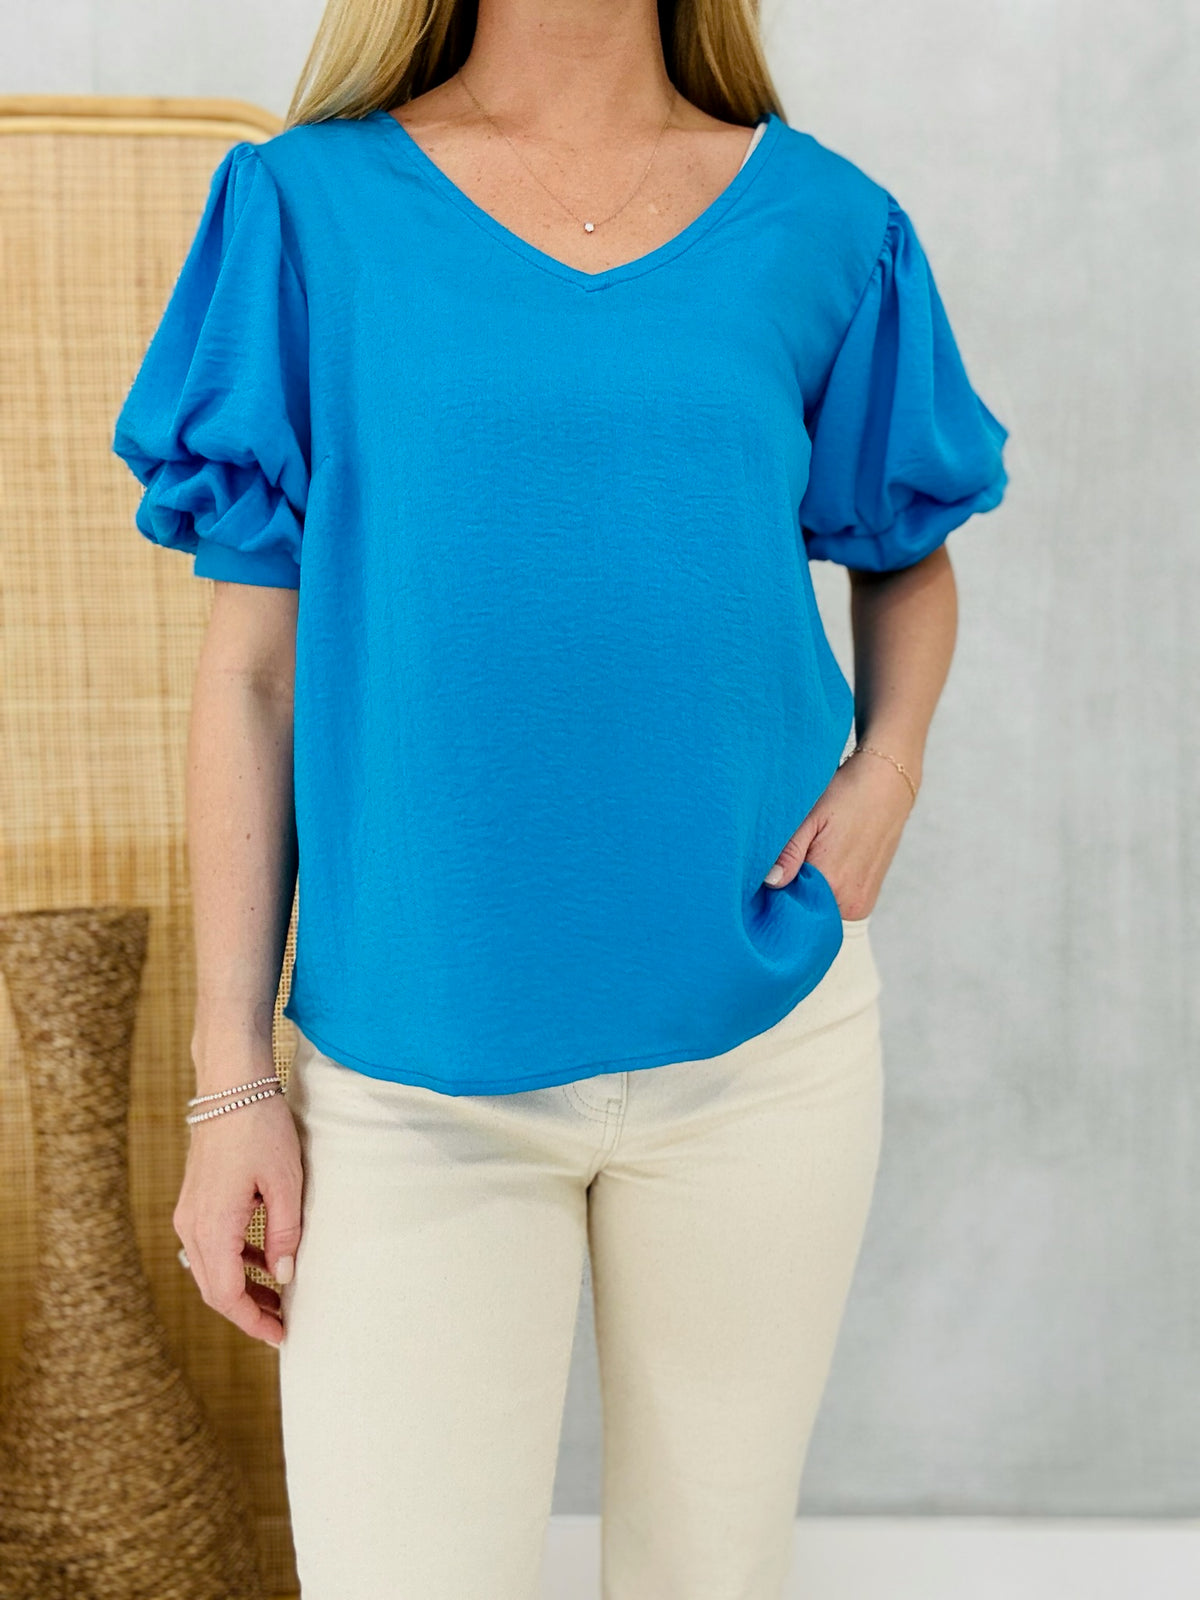 Women's Boutique Tops Page 2 - West of Fifty Five